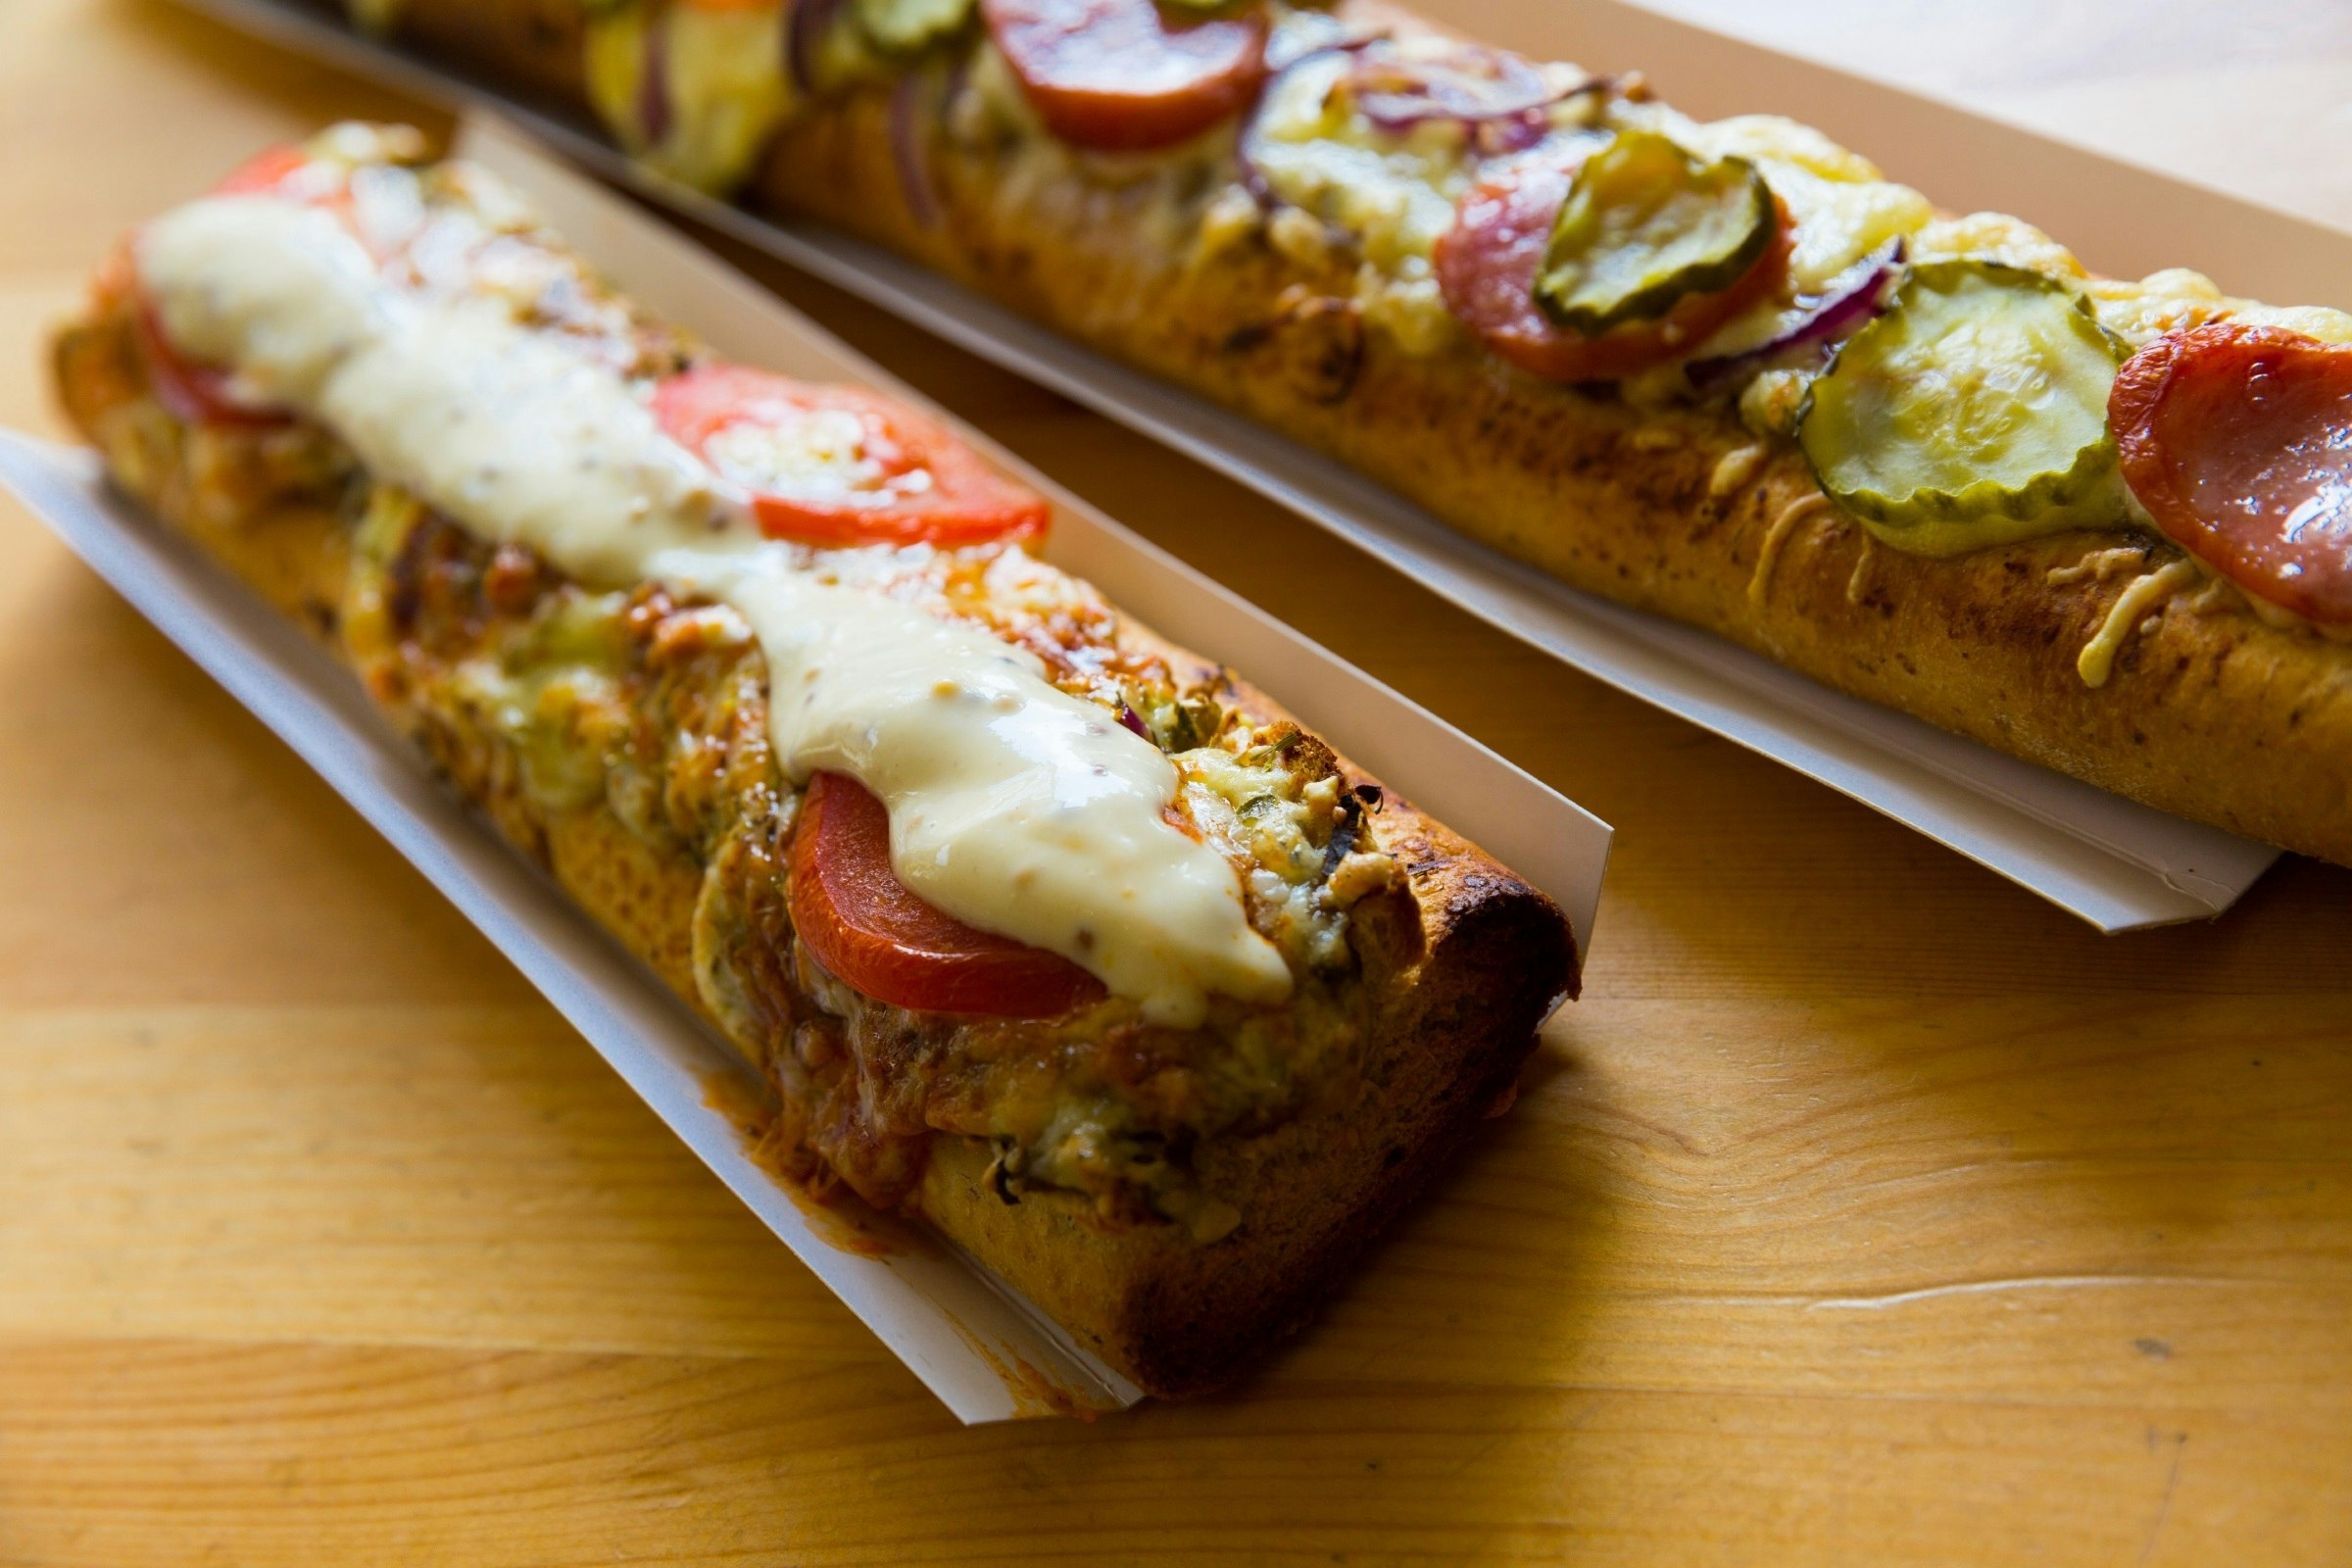 Two half-baguettes filled with sliced vegetables and toasted with melted cheese